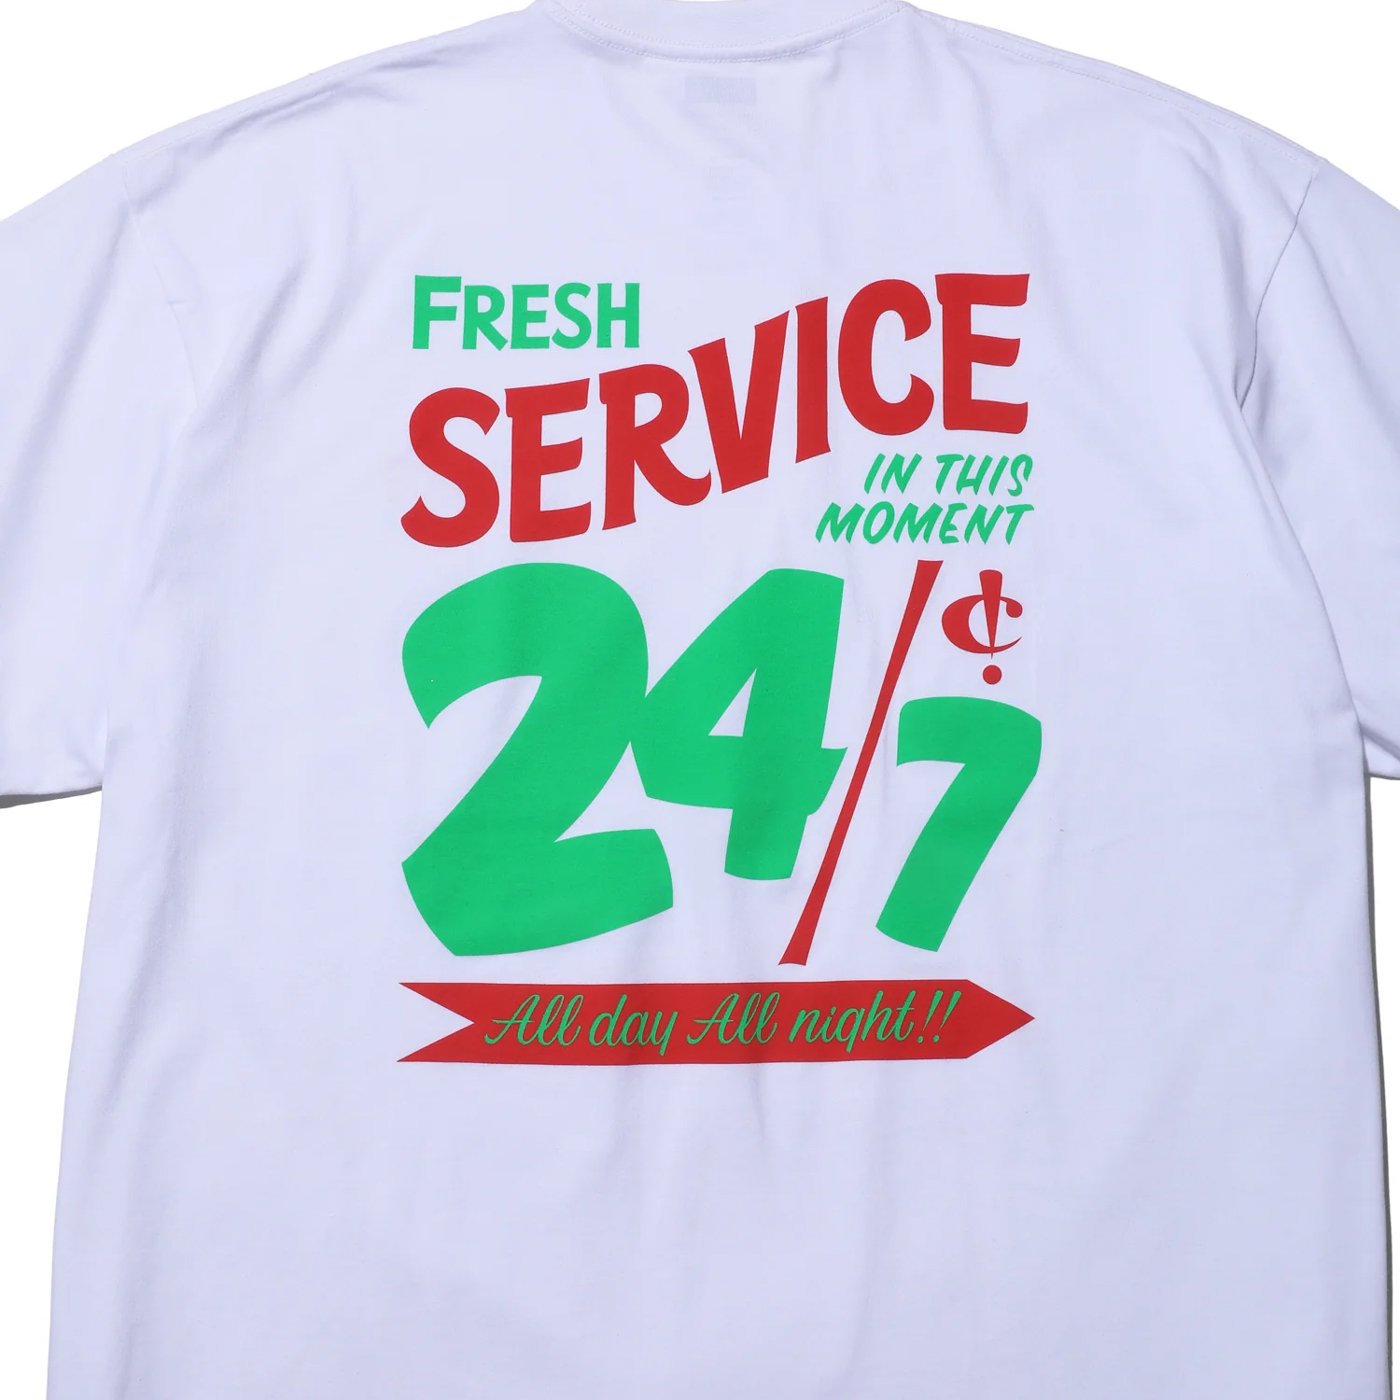 FreshService * FSC241-70125 CORPORATE PRINTED S/S TEE All Day All Night(3Ÿ)